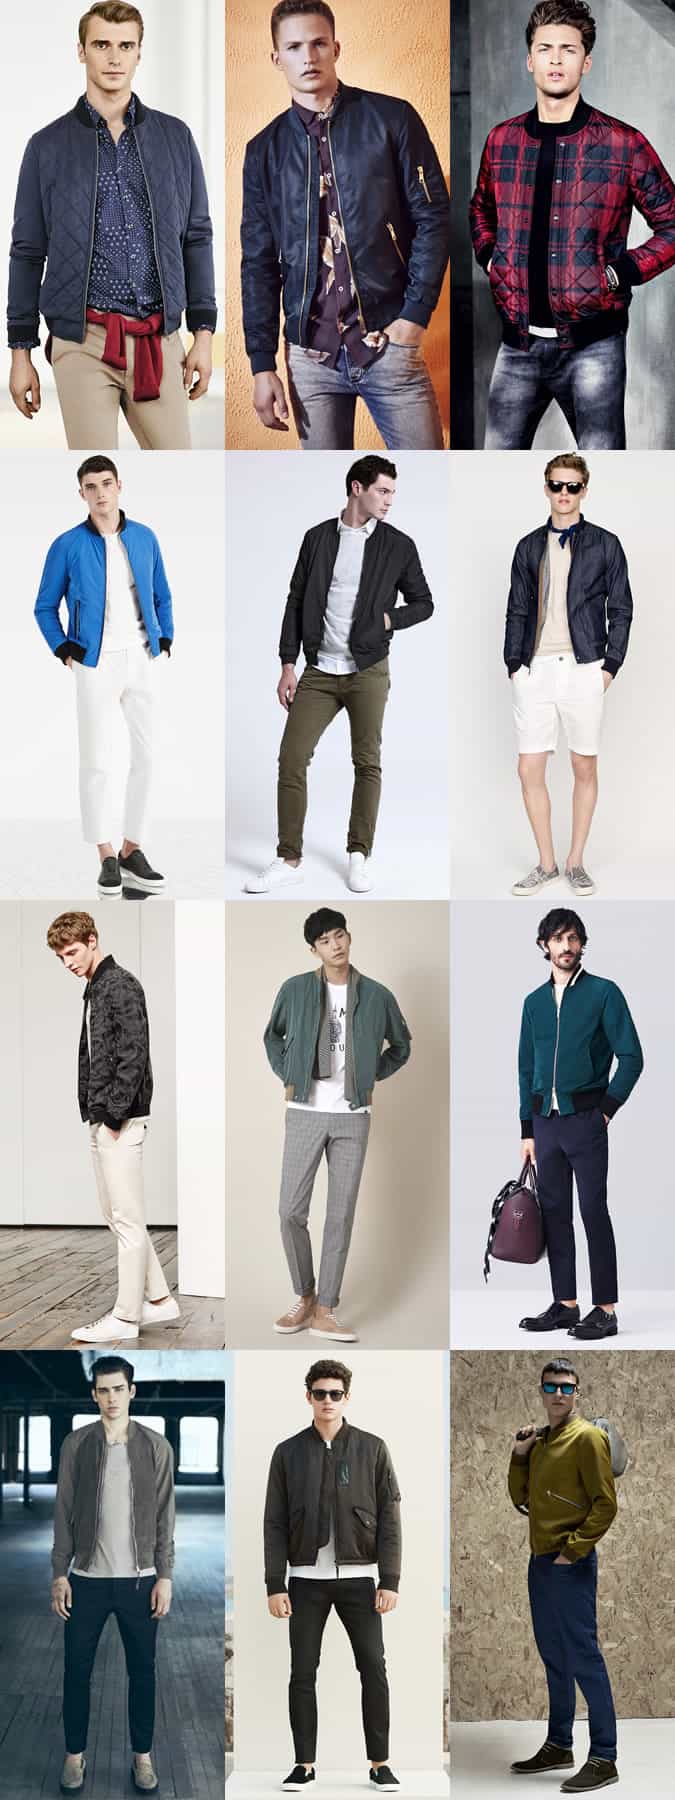 Men's Bomber Jackets Spring Outfit Inspiration Lookbook